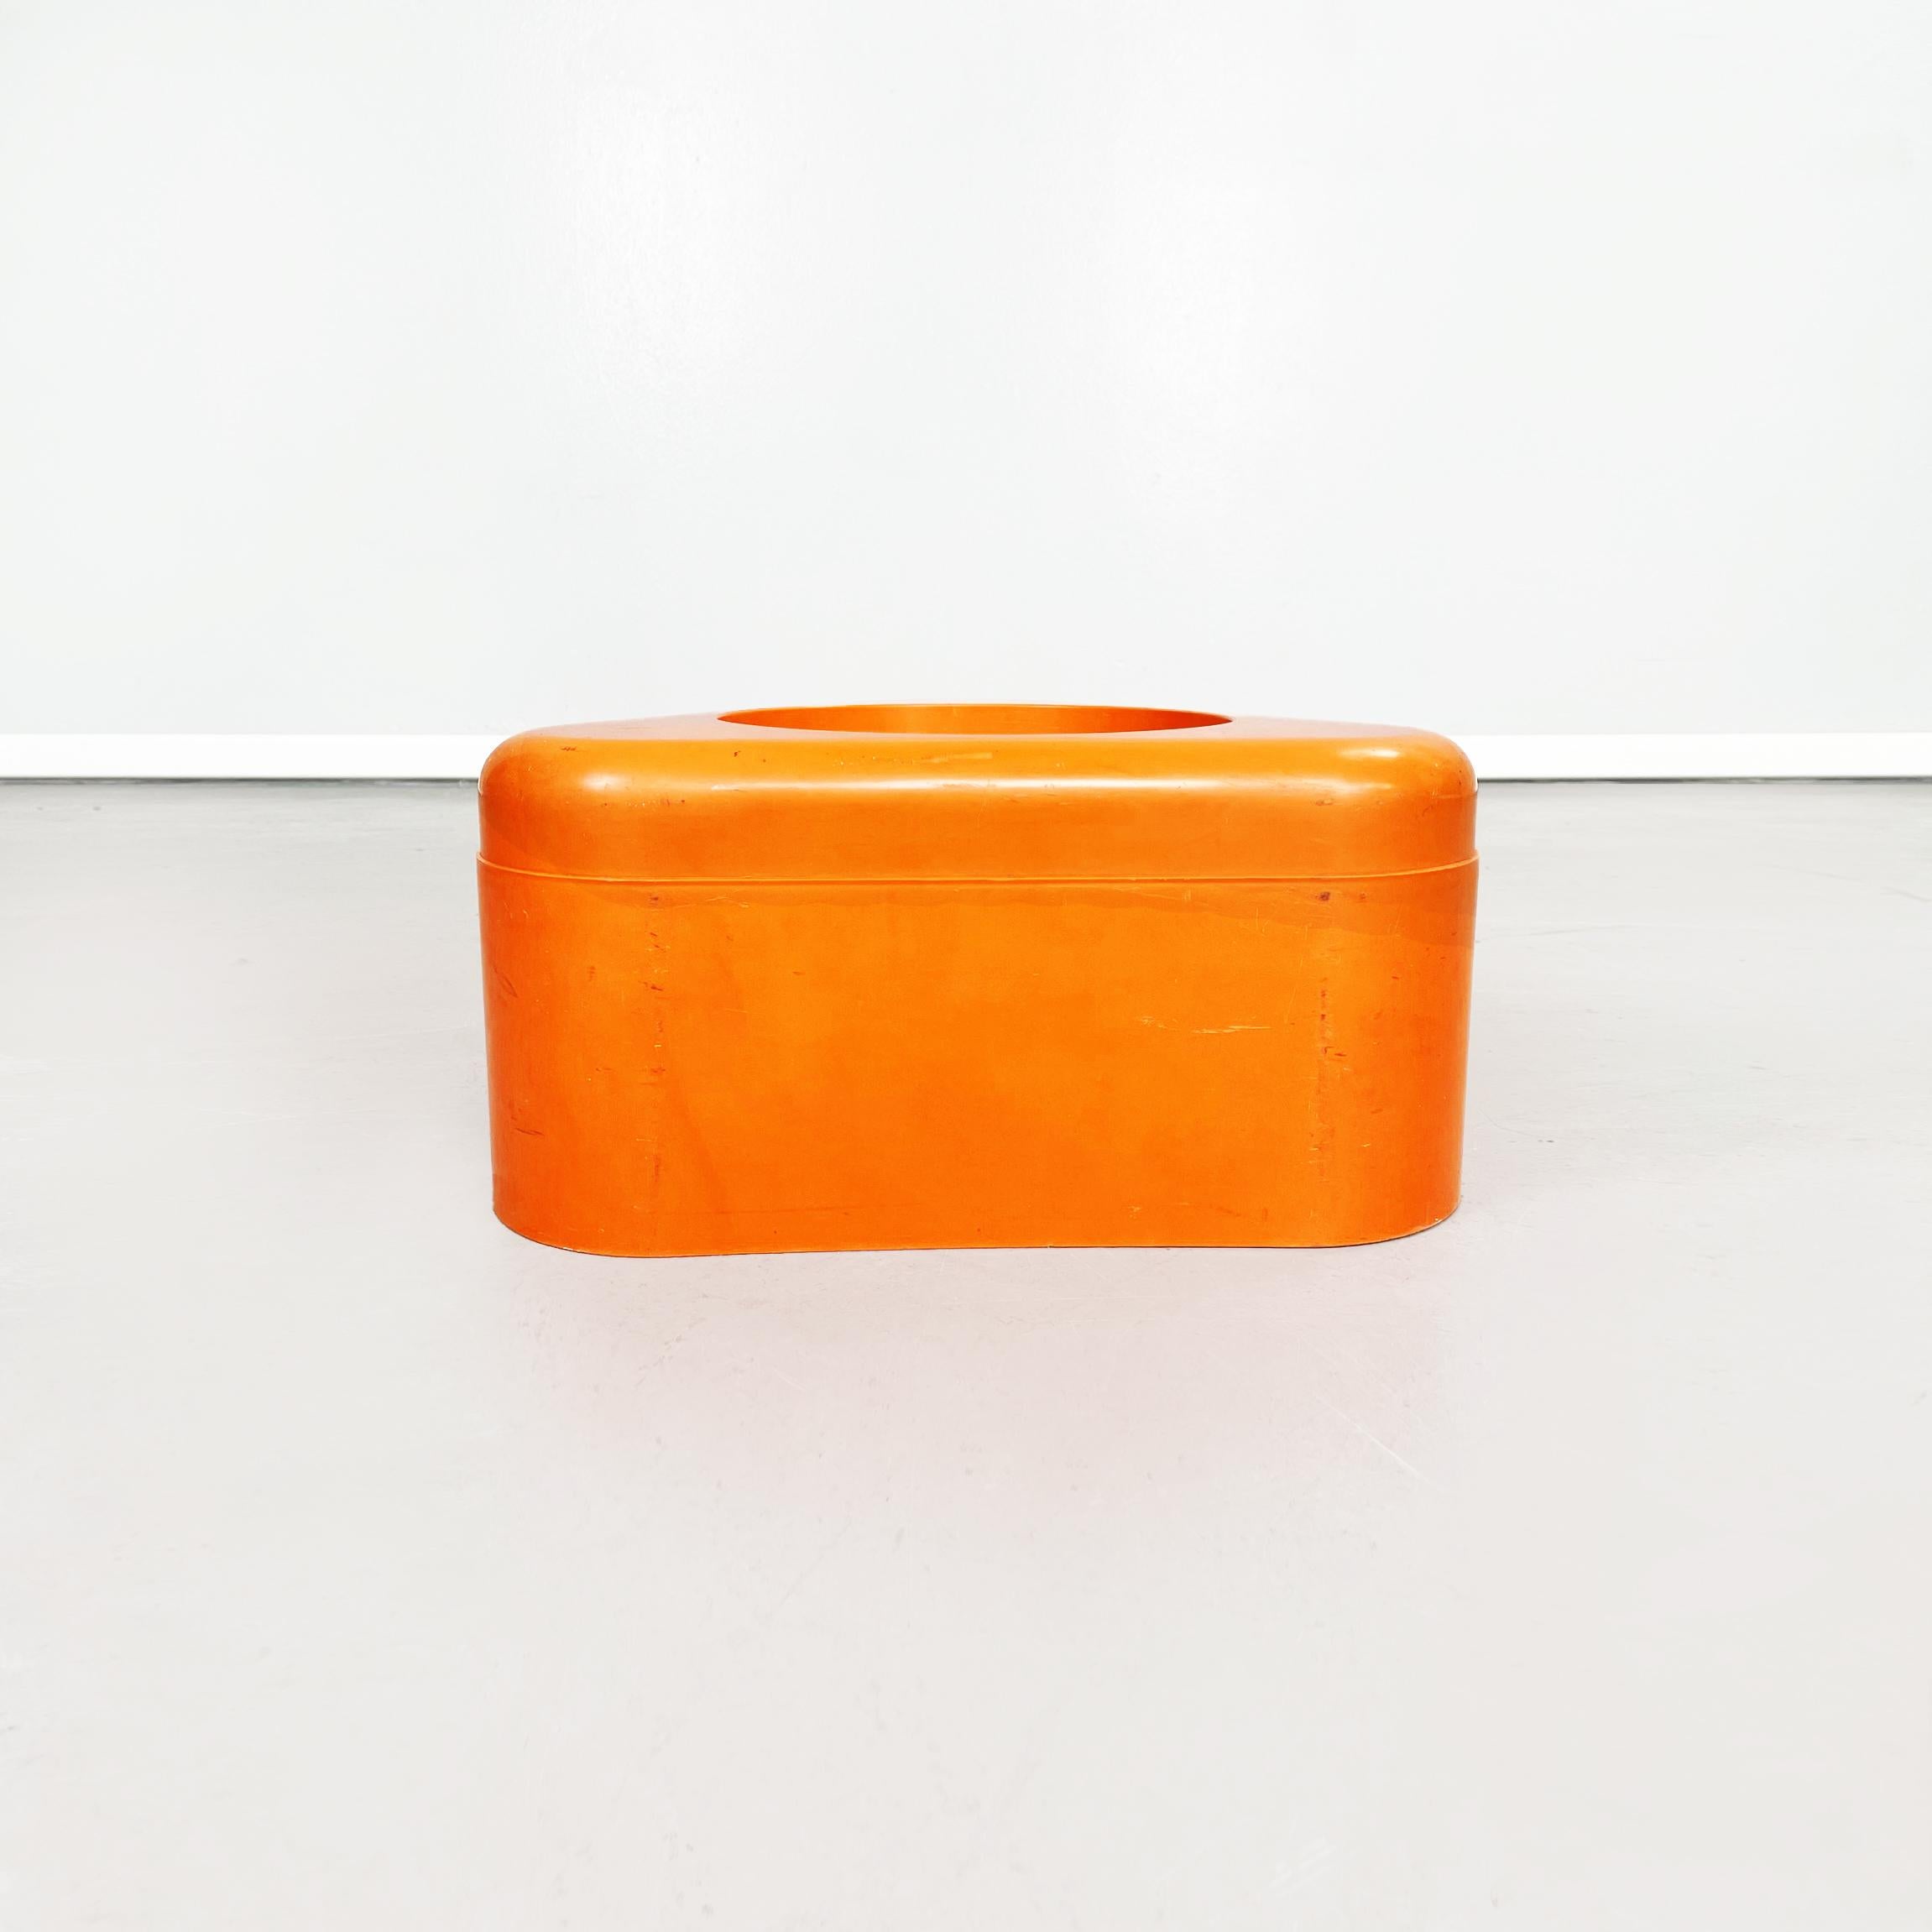 Italian mid-century Umbrella stand Juppi 202 by G. Castiglioni for Bilumen, 1960s
Umbrella stand mod. Juppi 202 with triangular base in orange ABS resin. The umbrella stand has rounded corners and in the center there are round holes, where you can